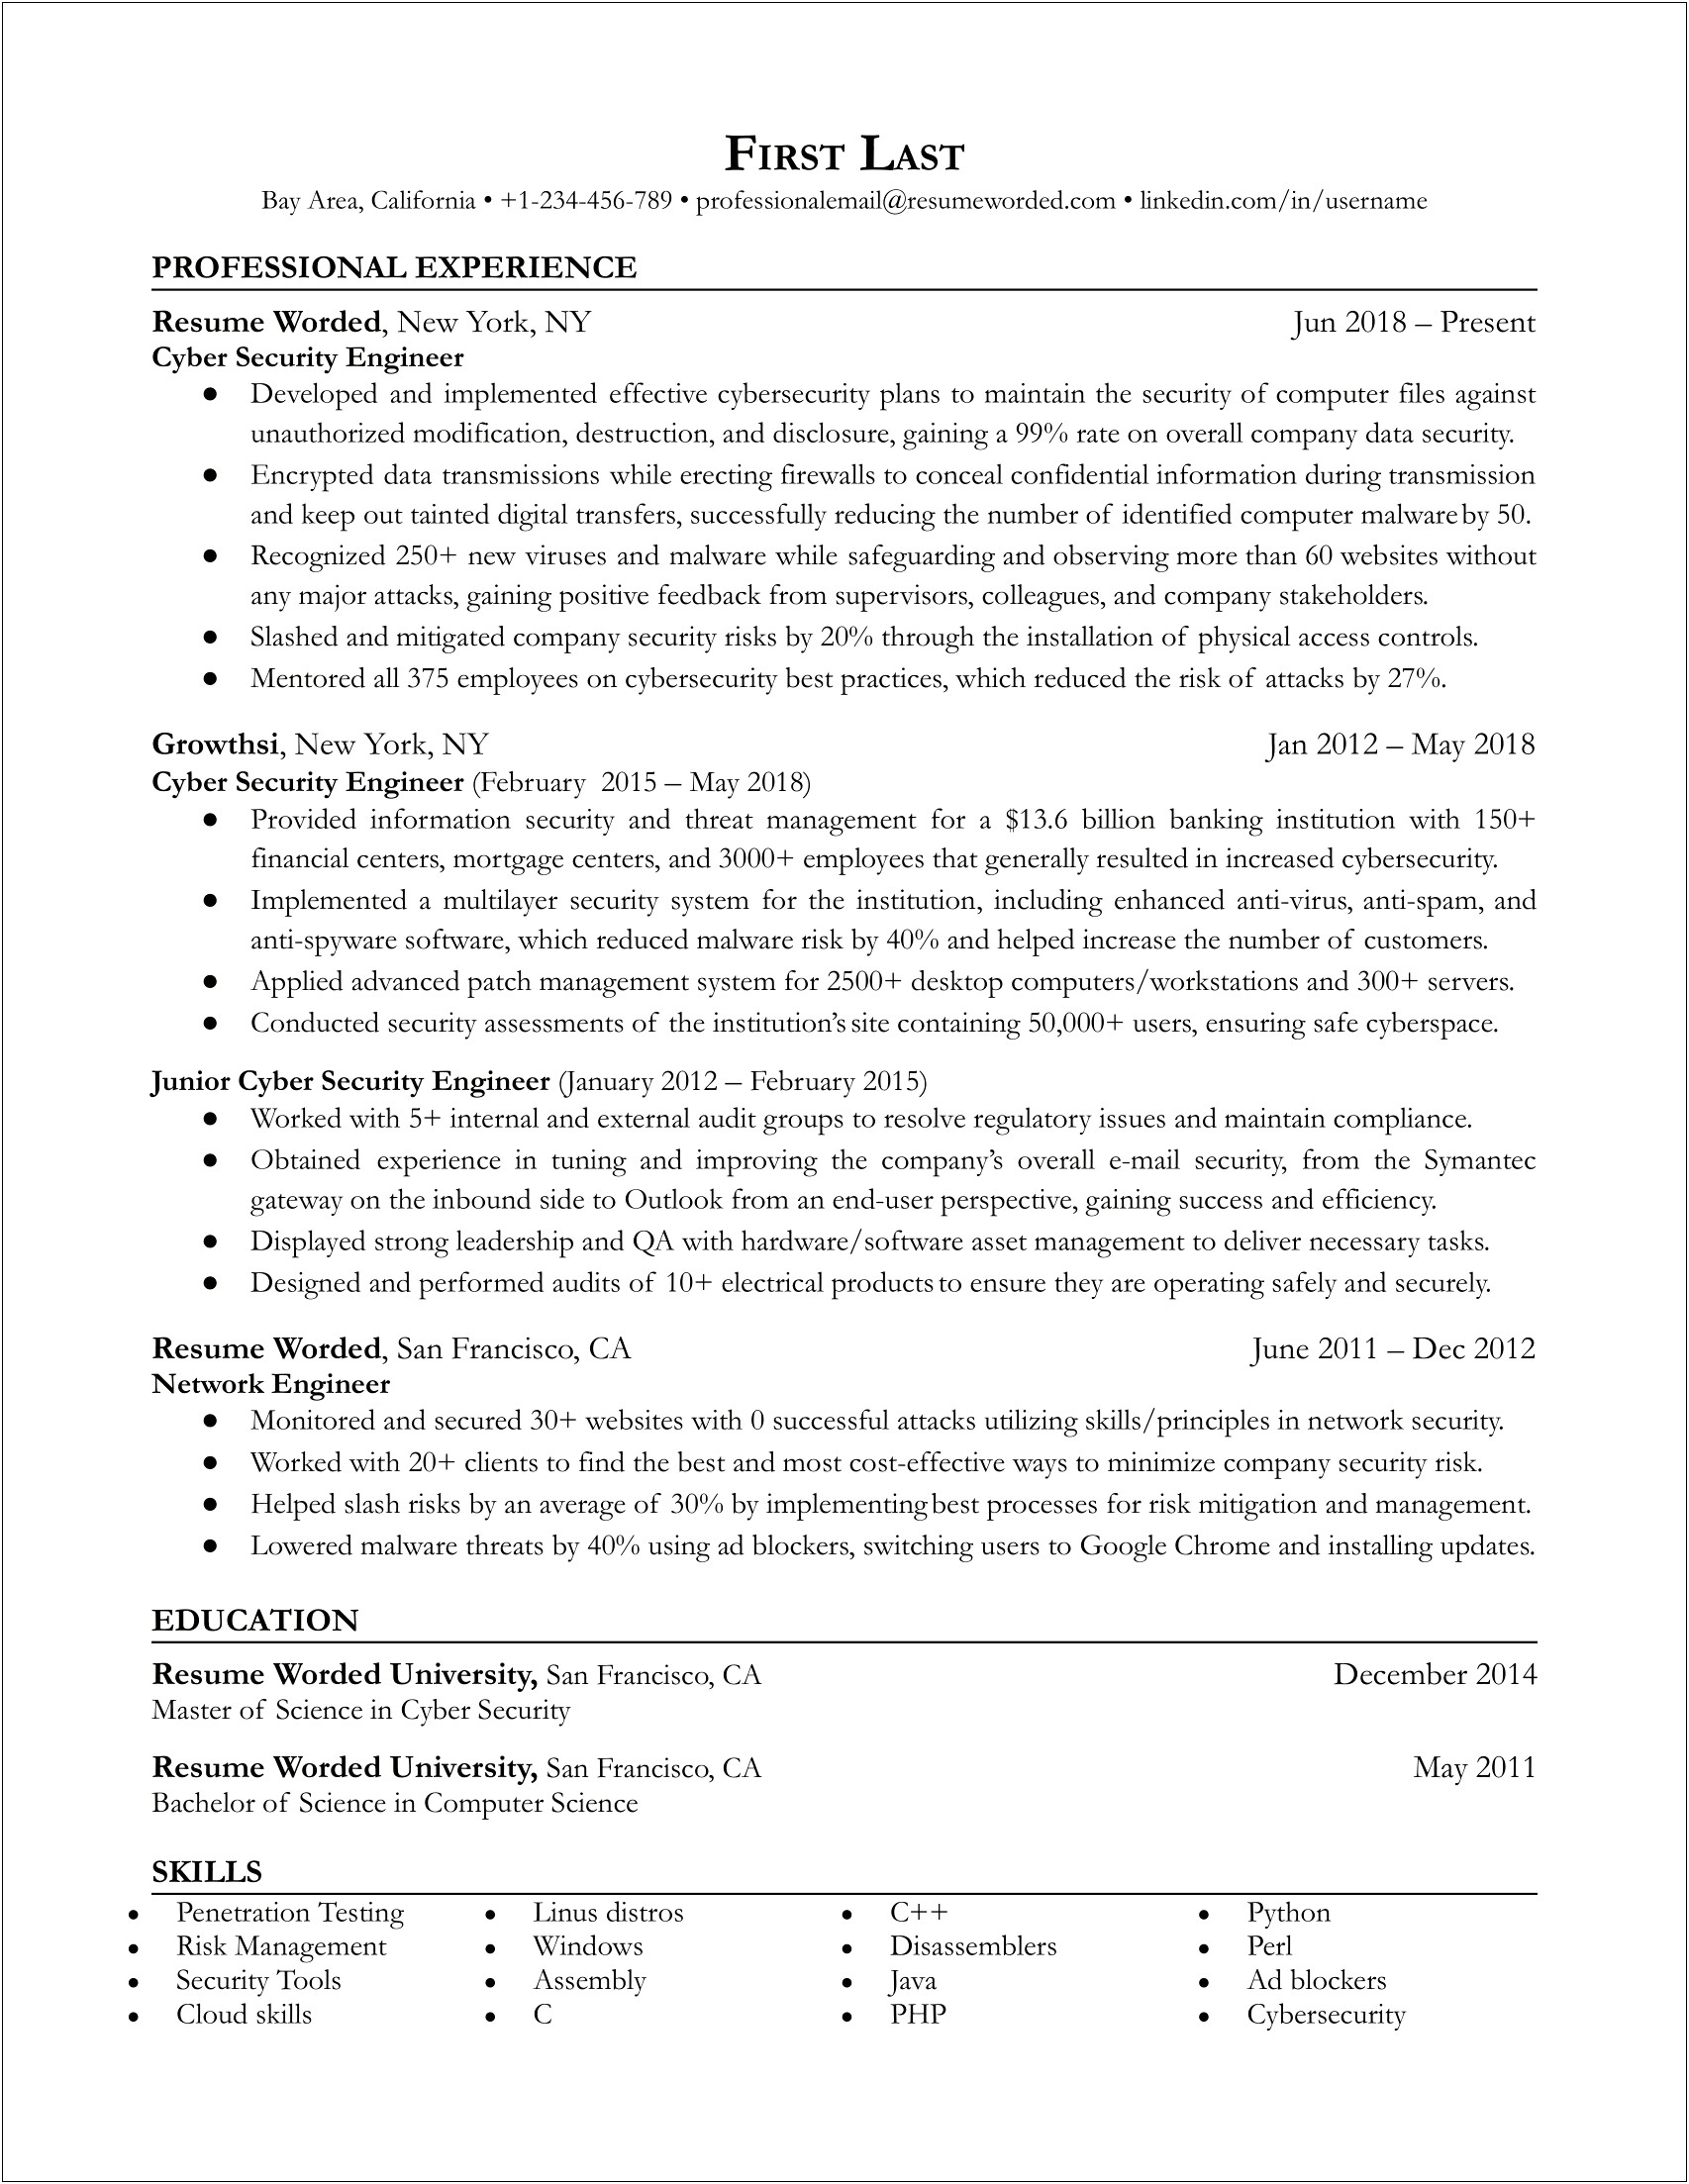 Resume Summary For Junior Security Analyst